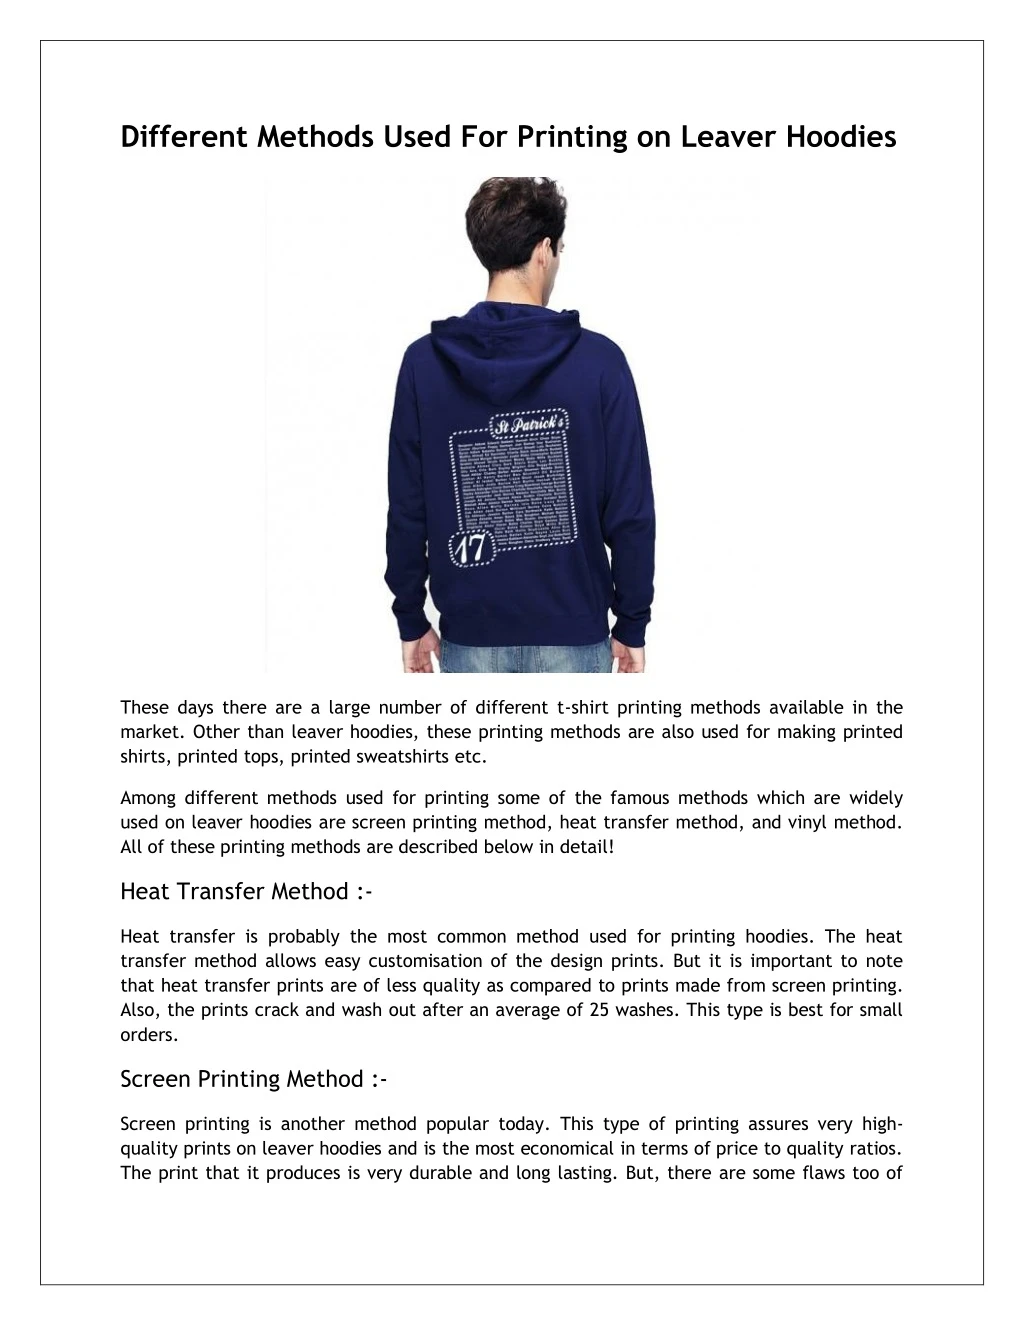 PPT - Different Methods Used For Printing on Leaver Hoodies PowerPoint ...